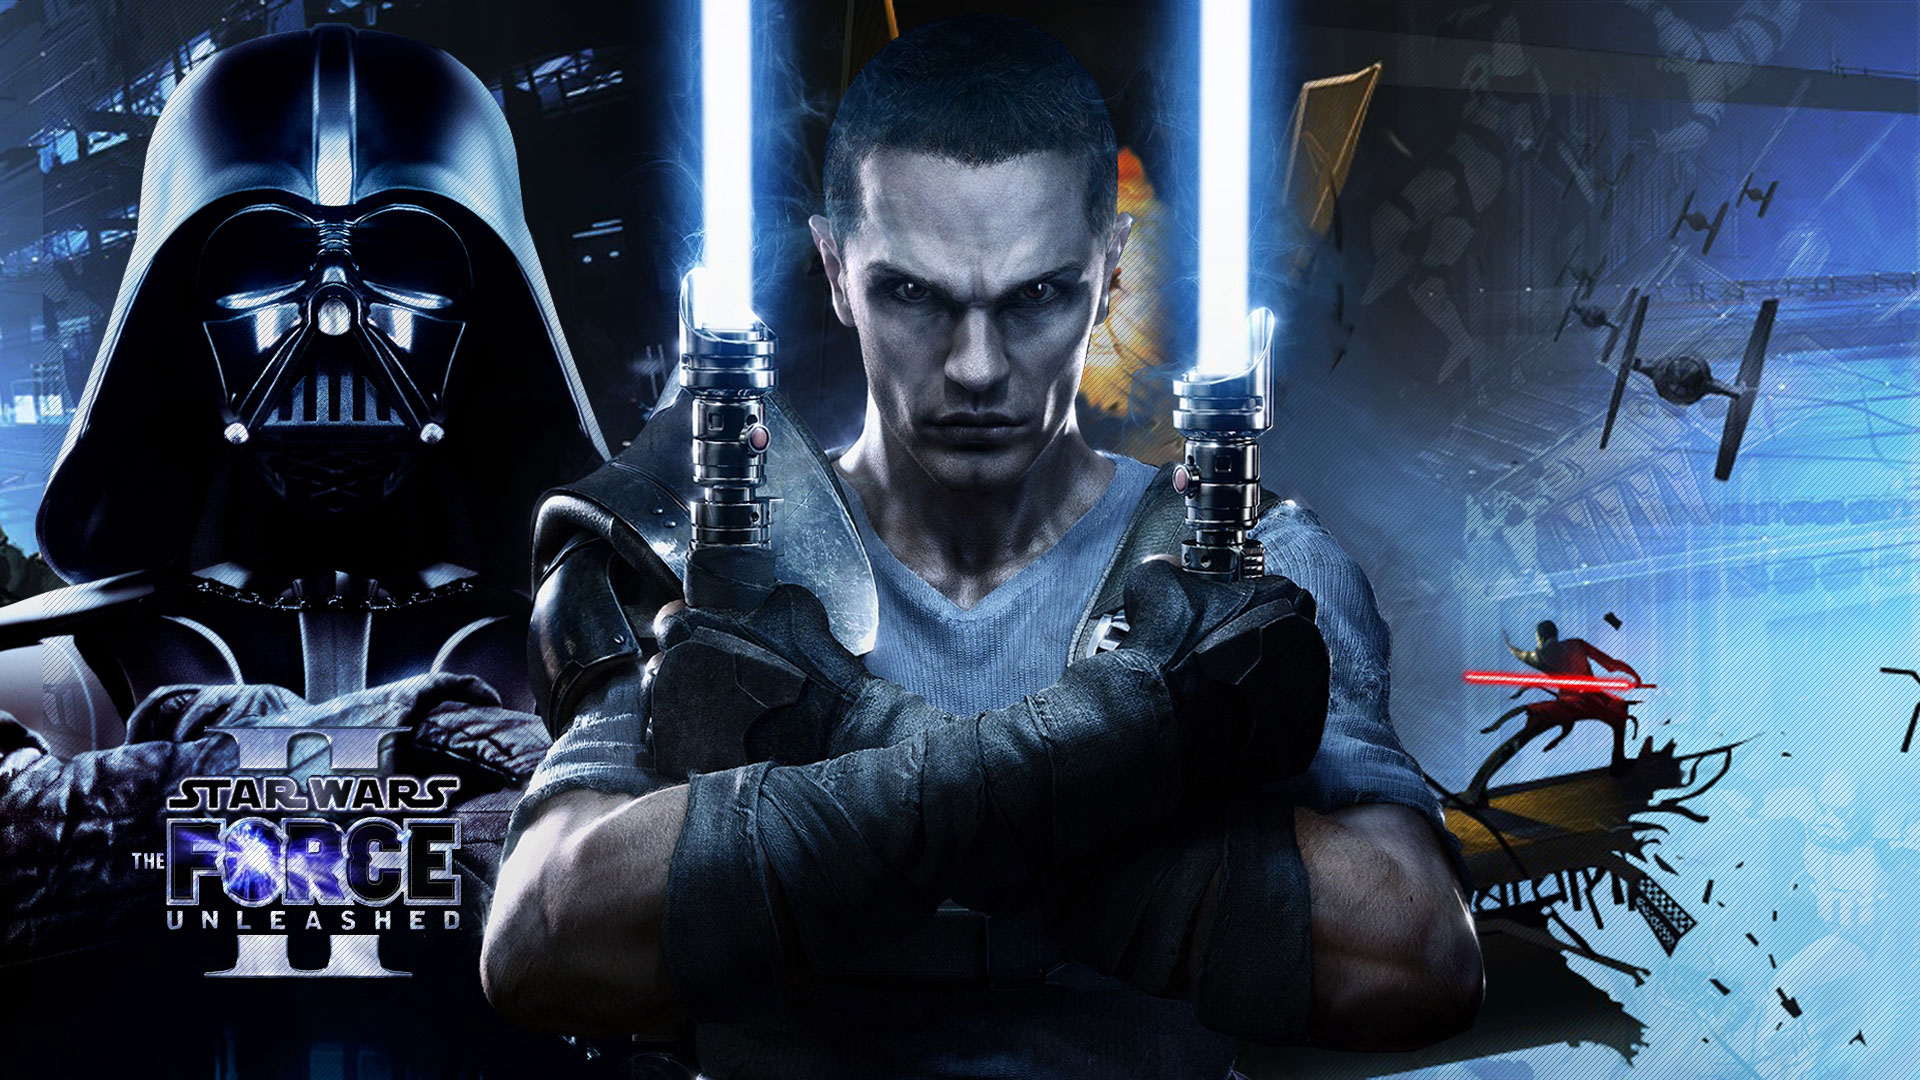 Star wars, wallpapers, force, unleashed, console, games (#198021)